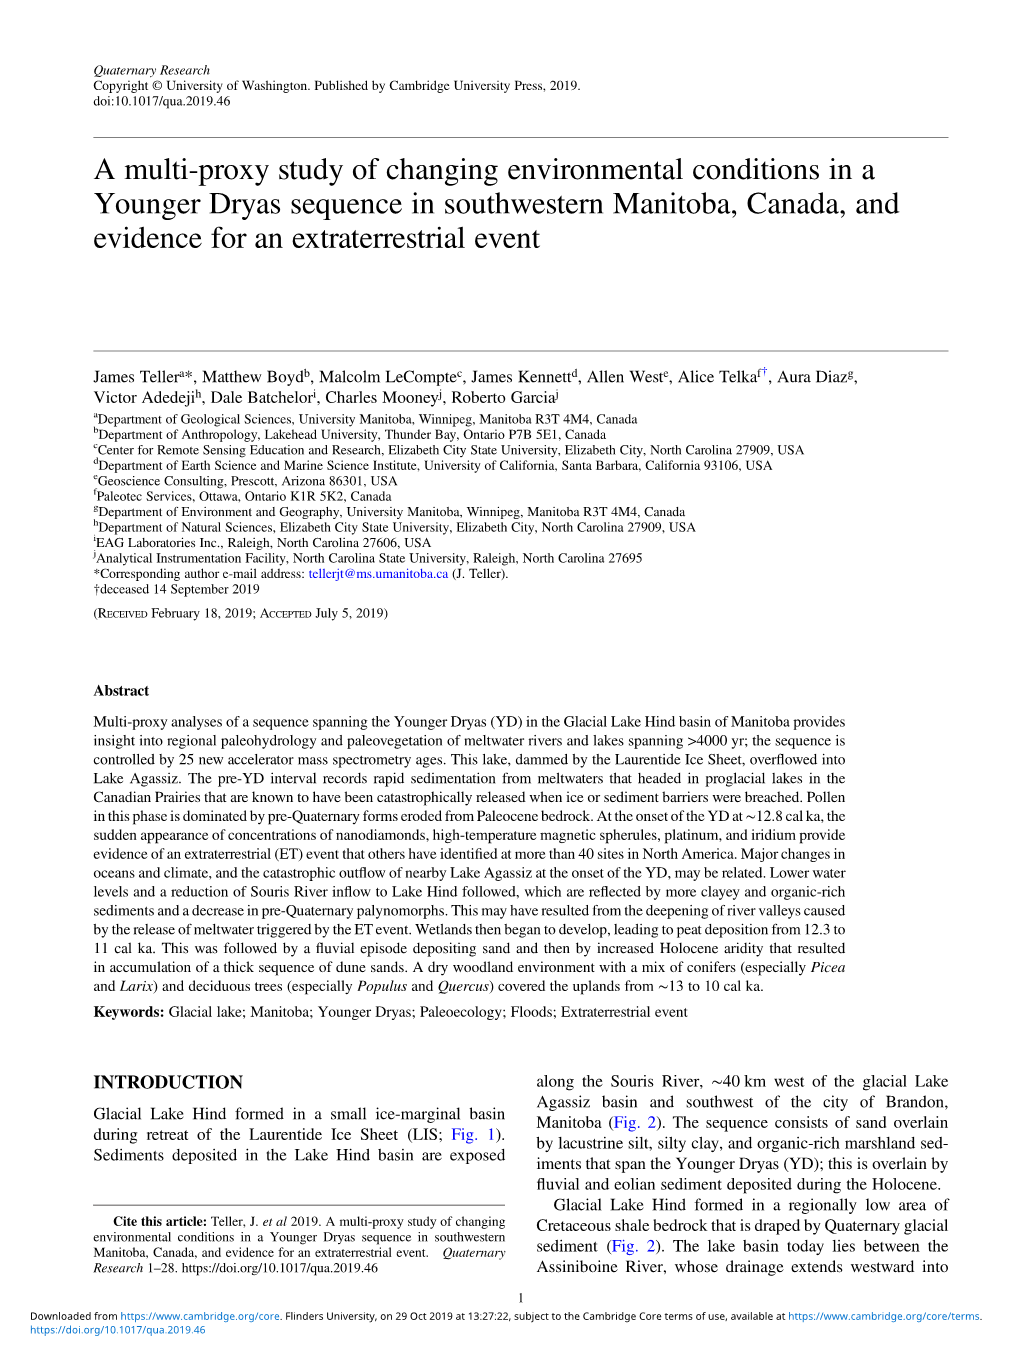 A Multi-Proxy Study of Changing Environmental Conditions in a Younger Dryas Sequence in Southwestern Manitoba, Canada, and Evidence for an Extraterrestrial Event